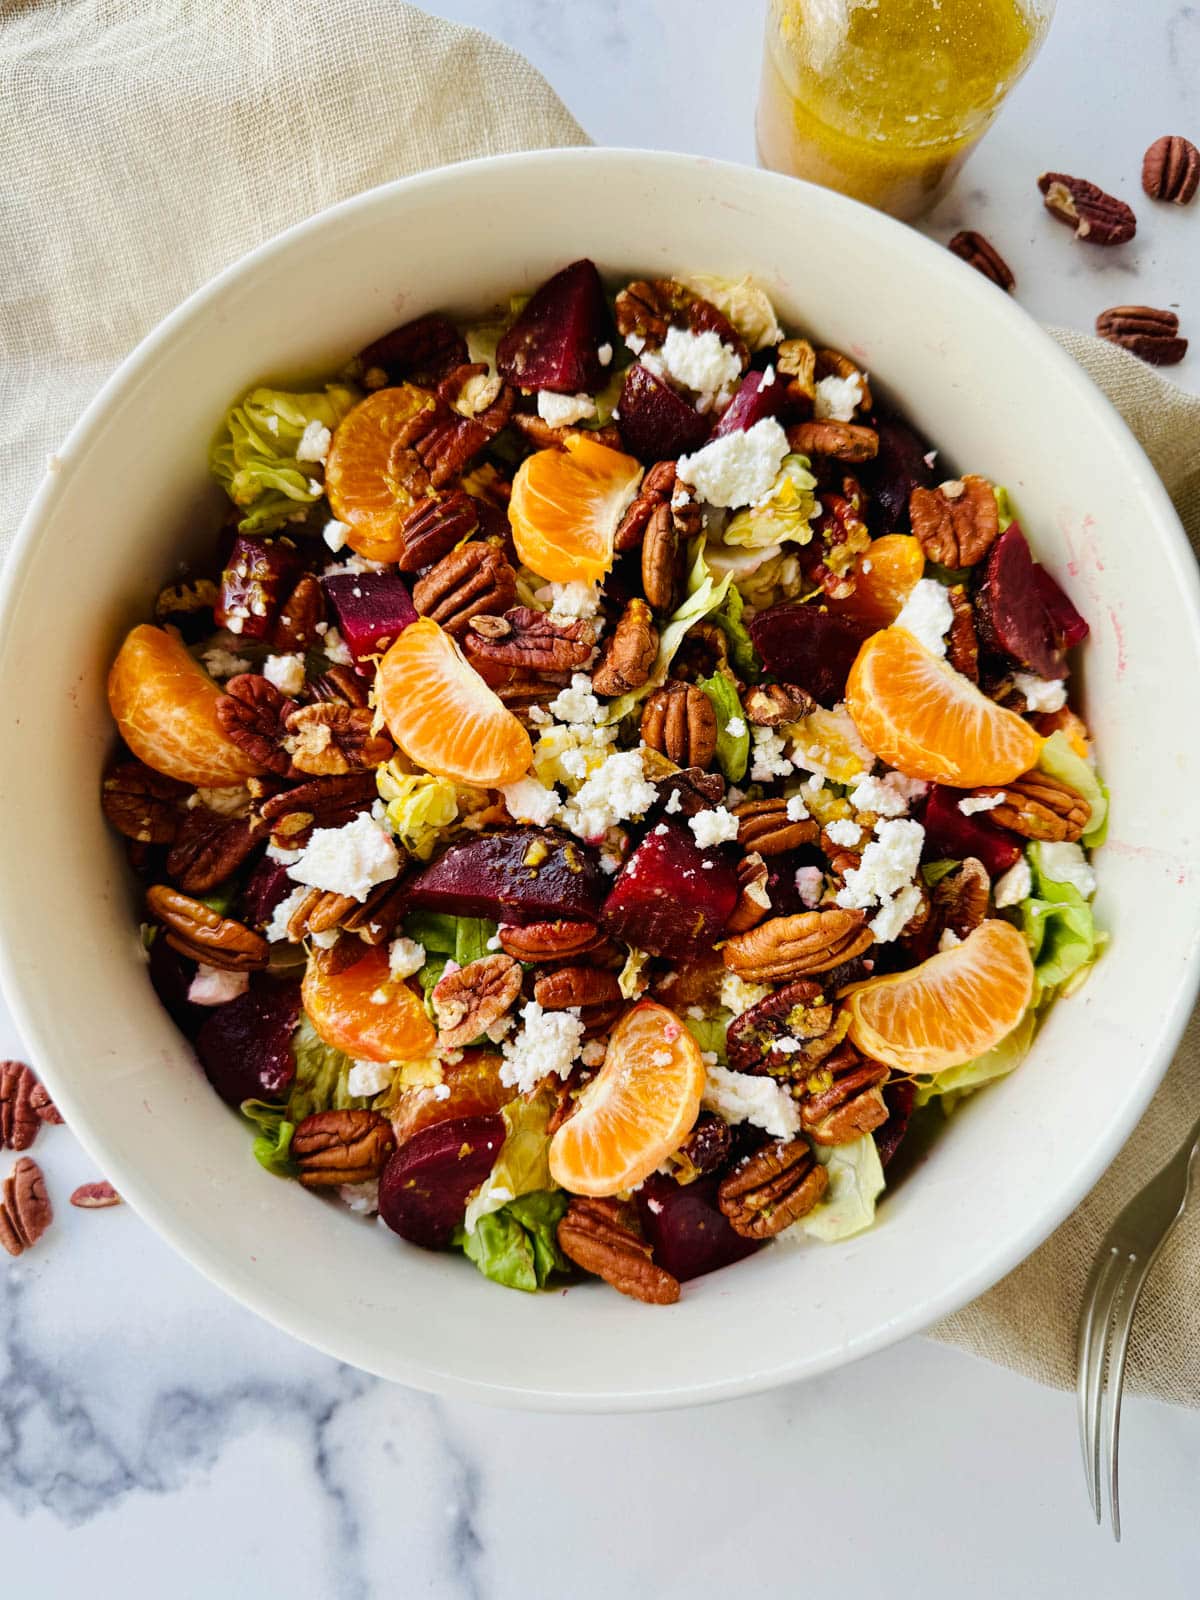 Beets, lettuce, orange slices, feta and pecans in a white bowl on a white marble counter.